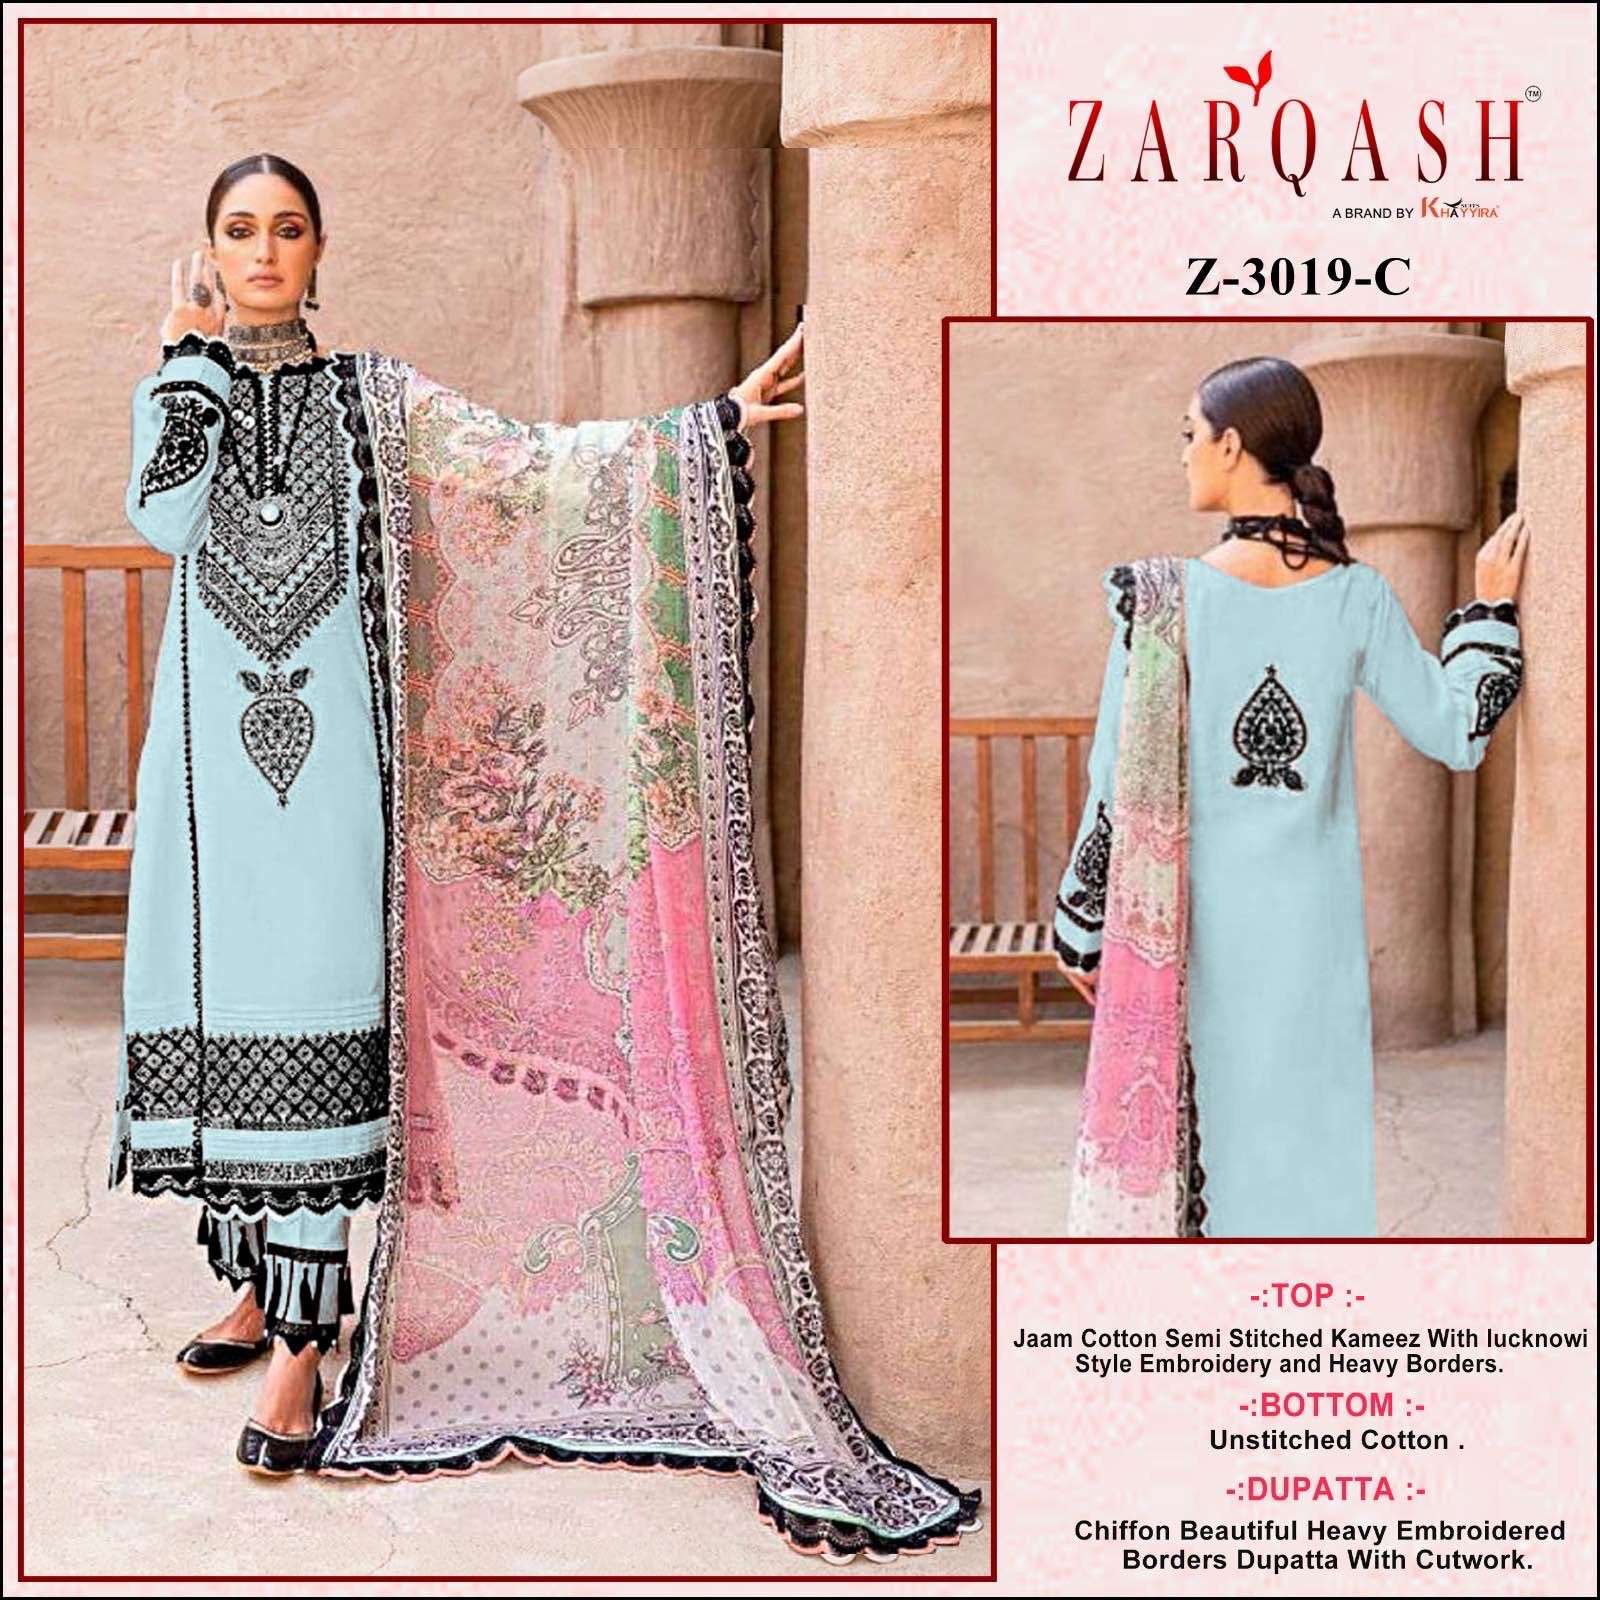 ZARQASH Z 3019 COTTON WITH EMBROIDERY SALWAR SUITS AT WHOLES...